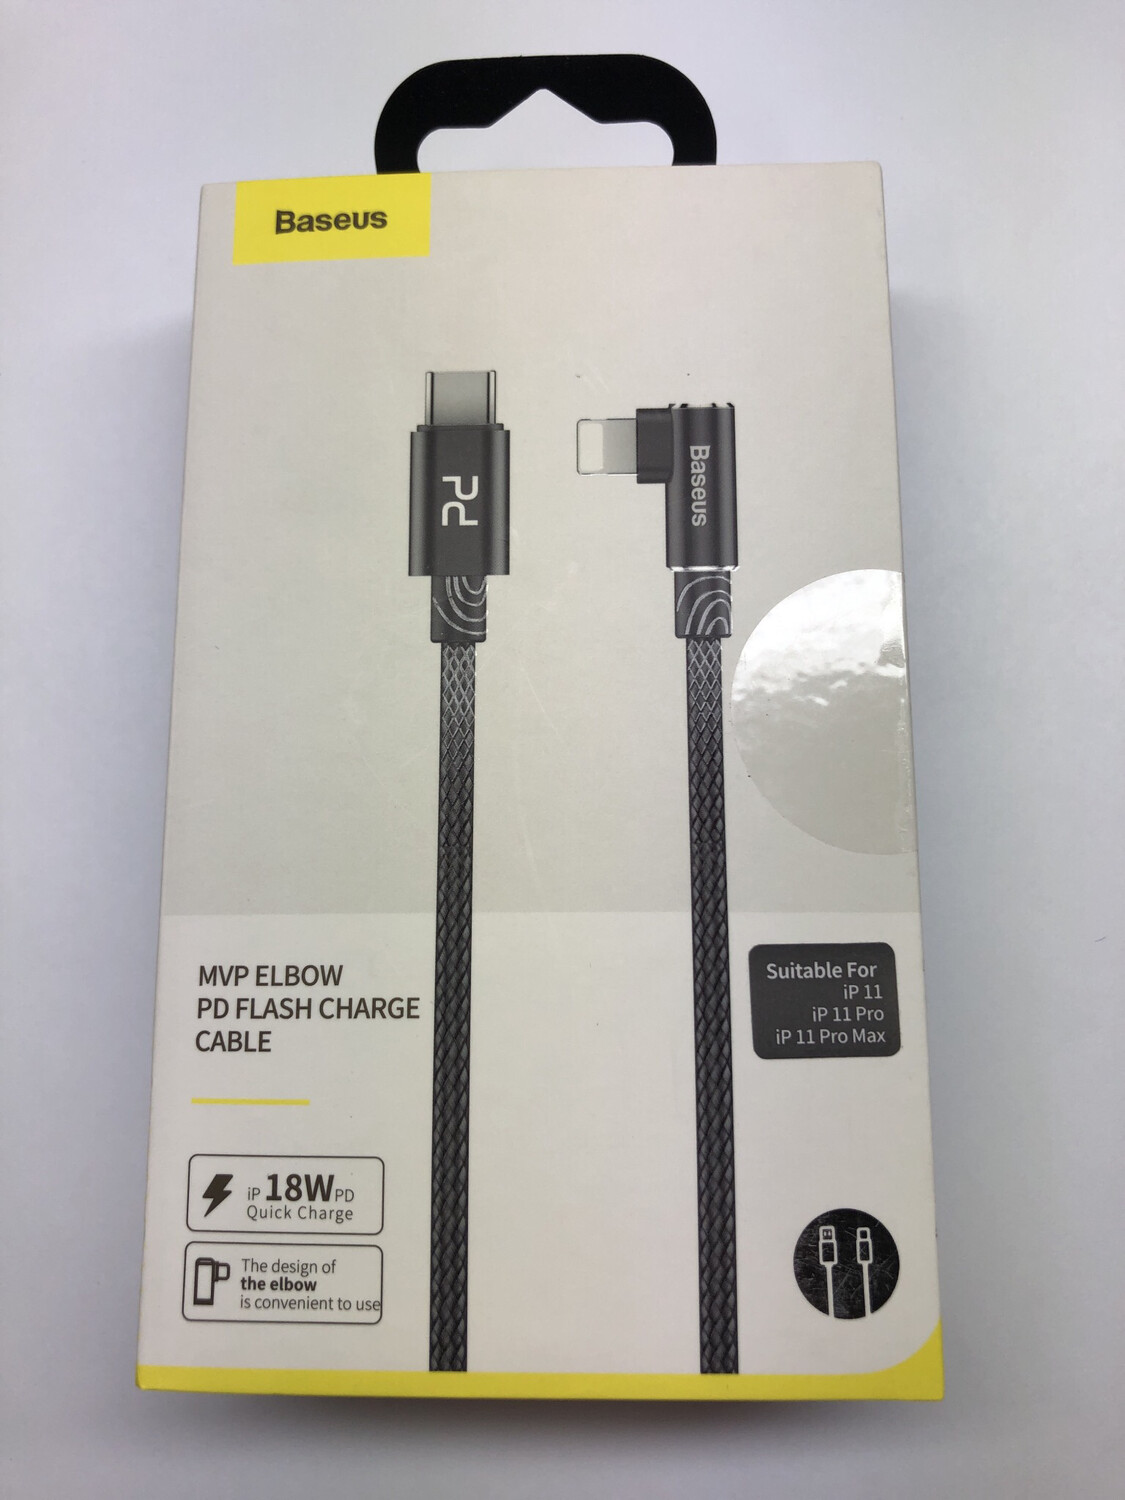 Baseus Cable MVP Elbow PD Flash Charge Cable